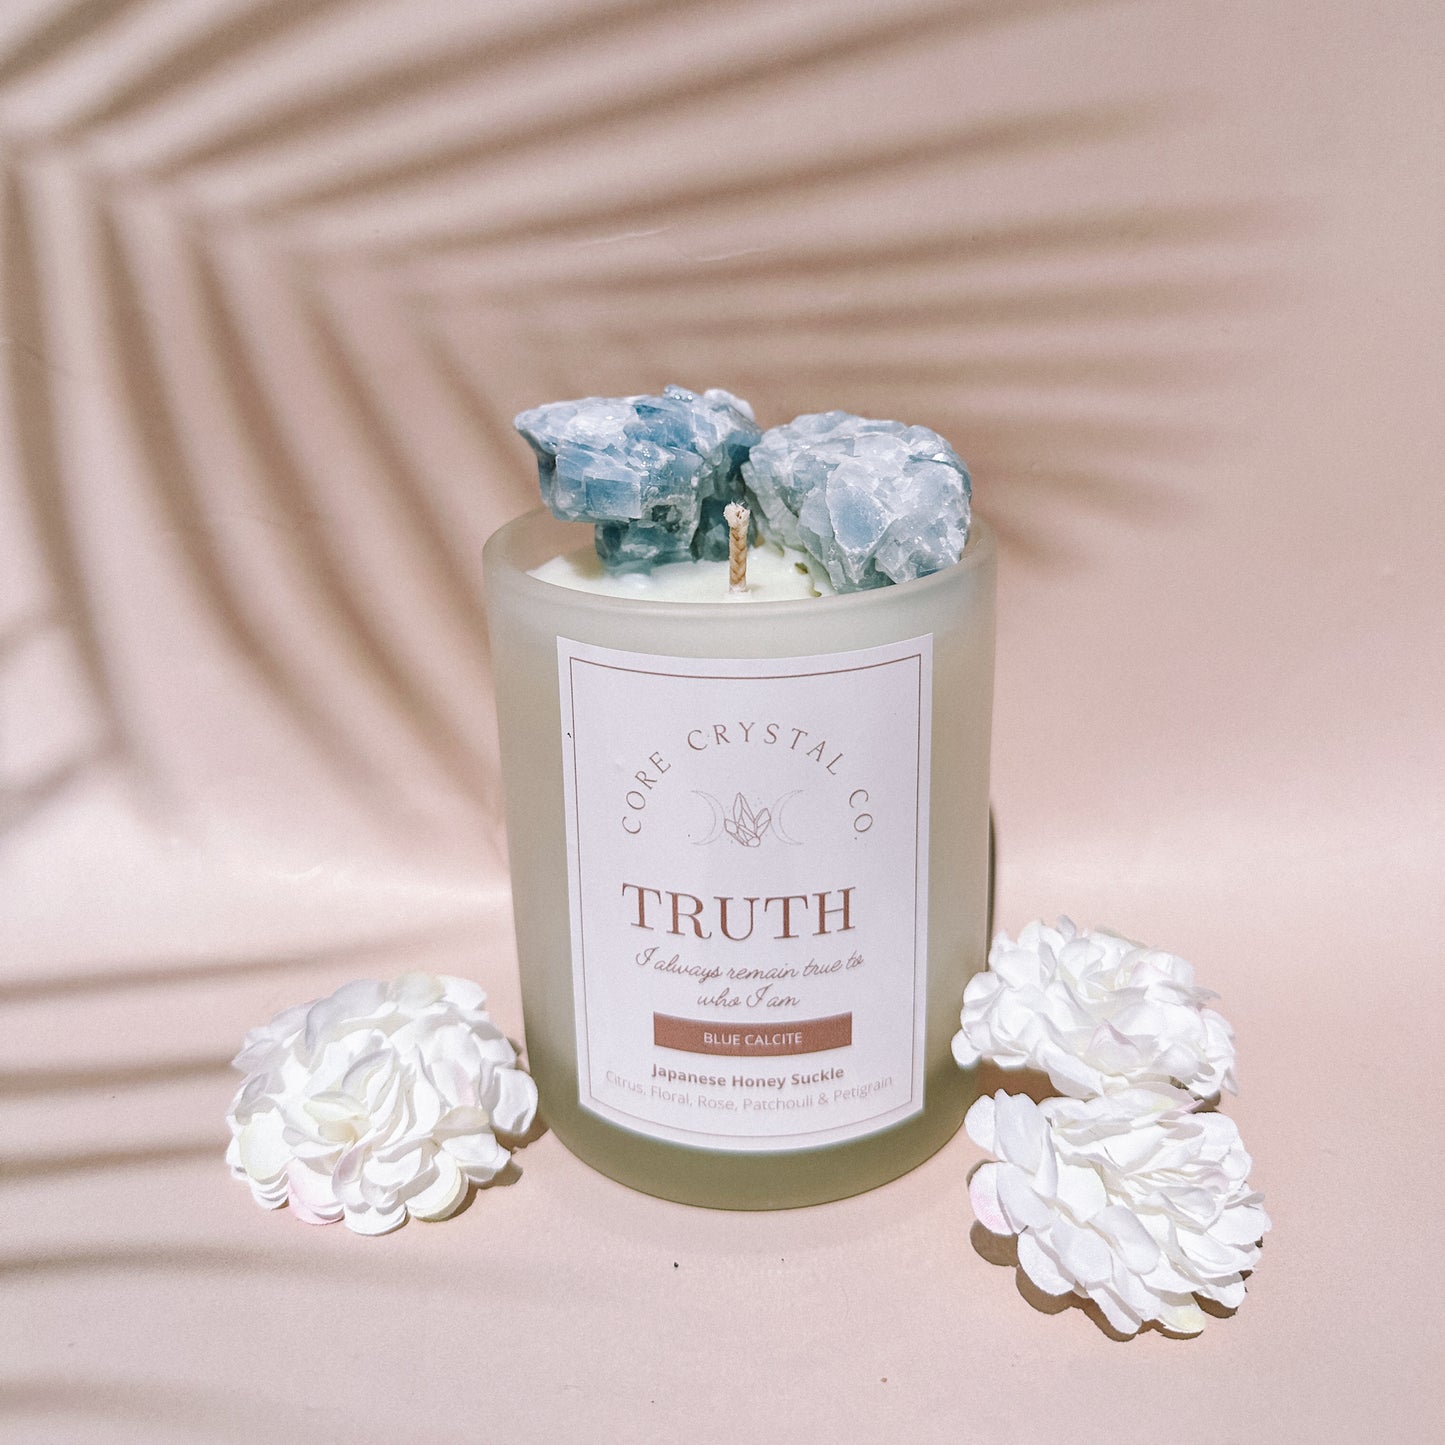 TRUTH Japanese Honey Suckle Crystal Infused Candle